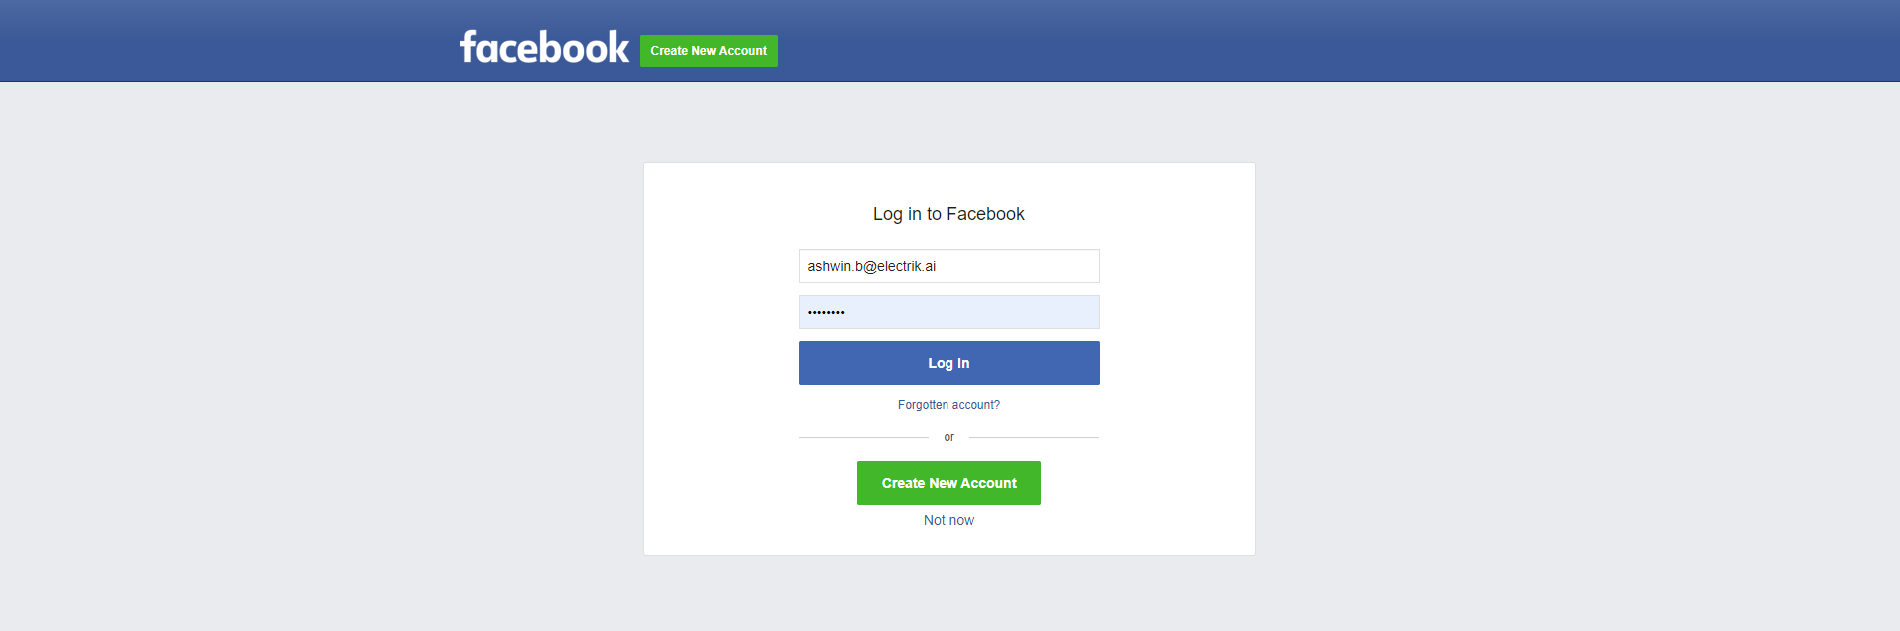 Step 7 Provide your Facebook Ads account User Id and Password-ElectrikAI